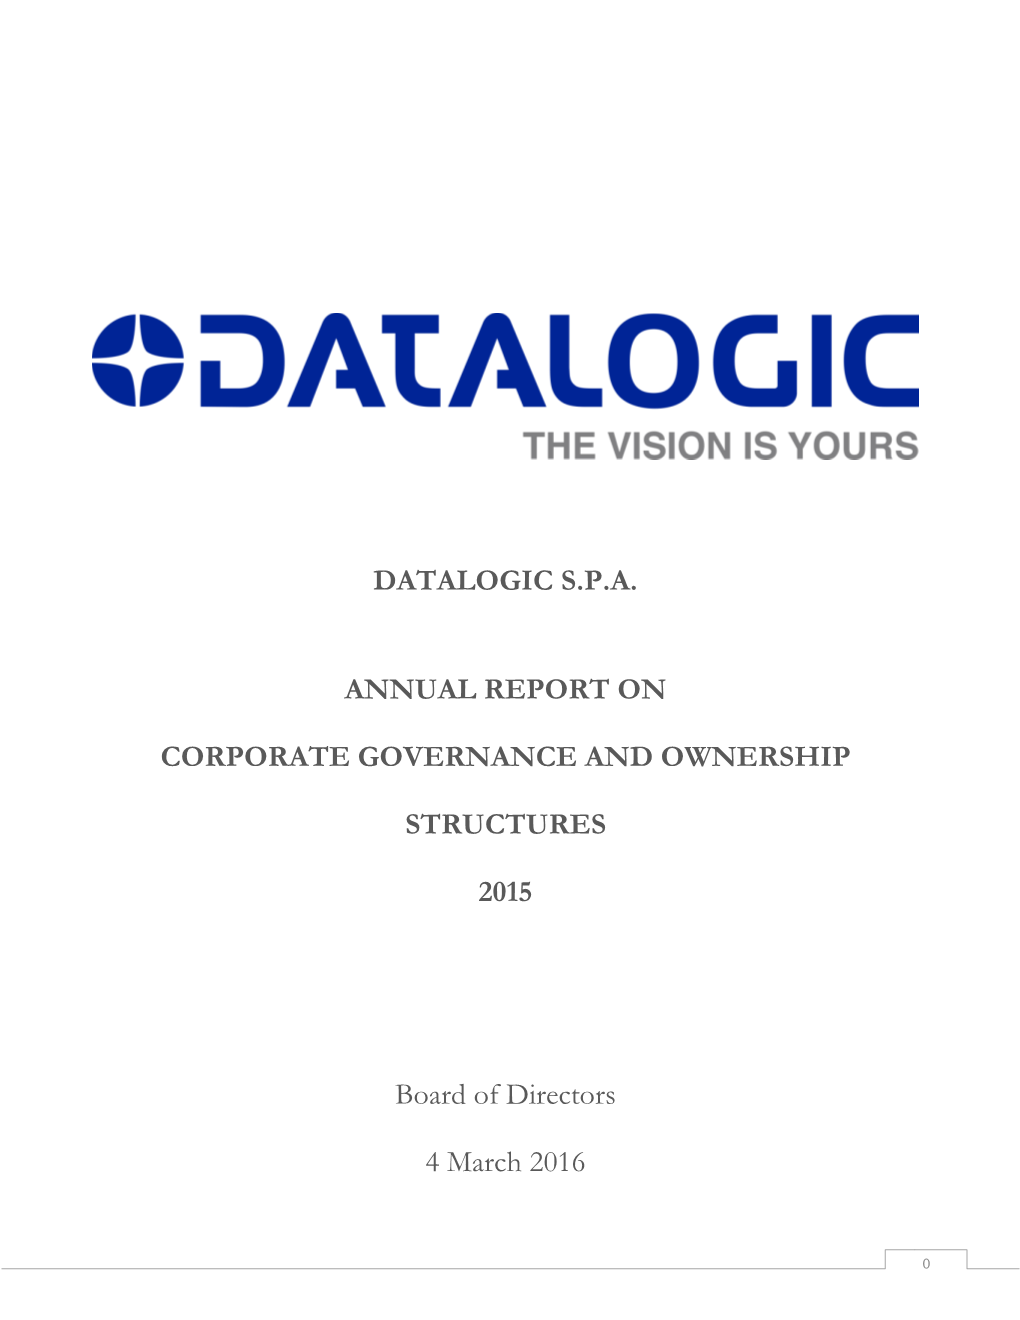 Datalogic S.P.A. Annual Report on Corporate